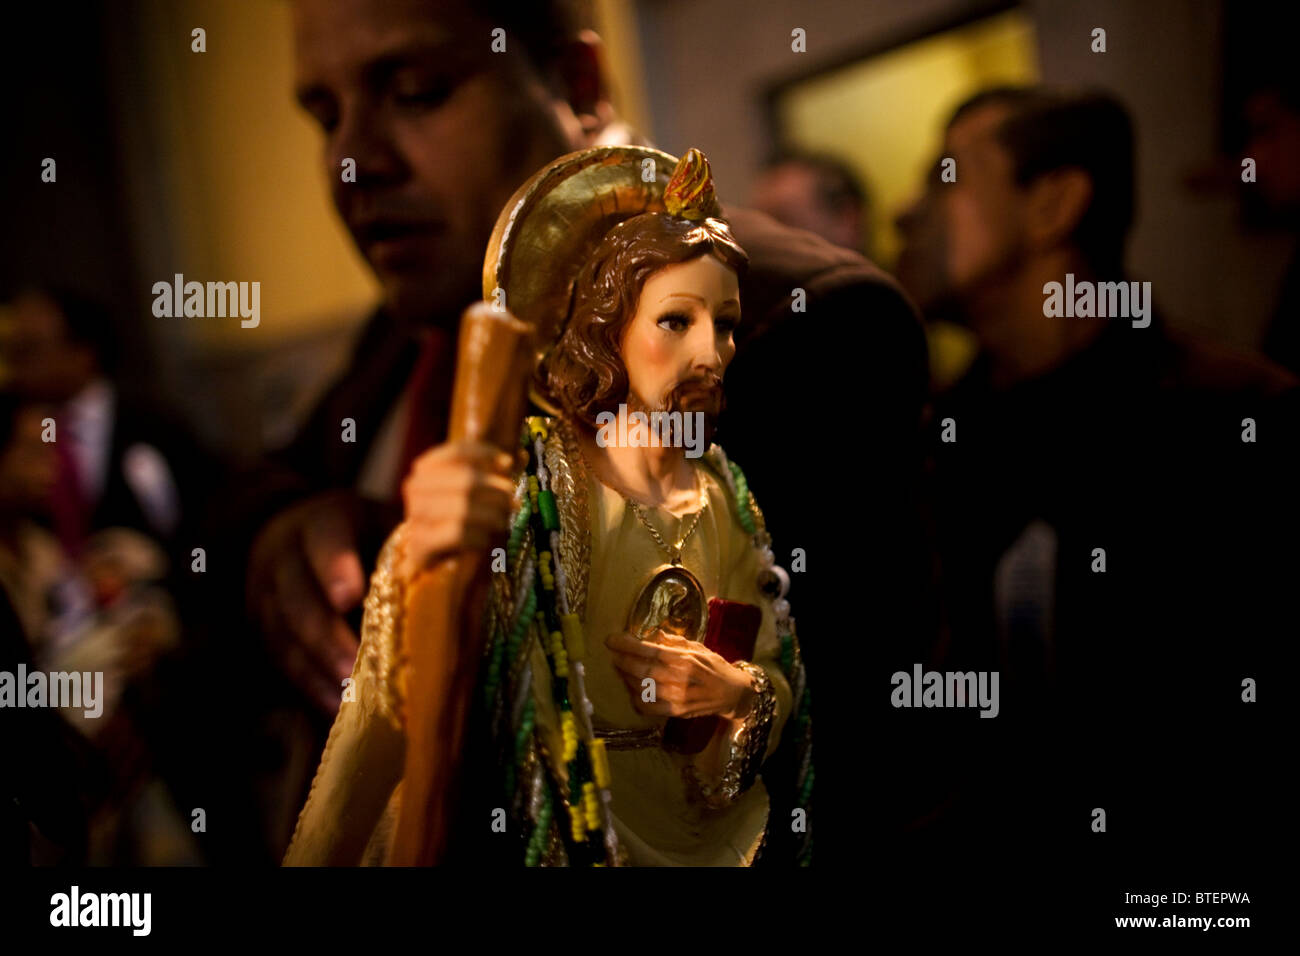 A pilgrim holds a sculpture of Saint Jude Thaddeus during a mass in San Hipolito church in Mexico City Stock Photo